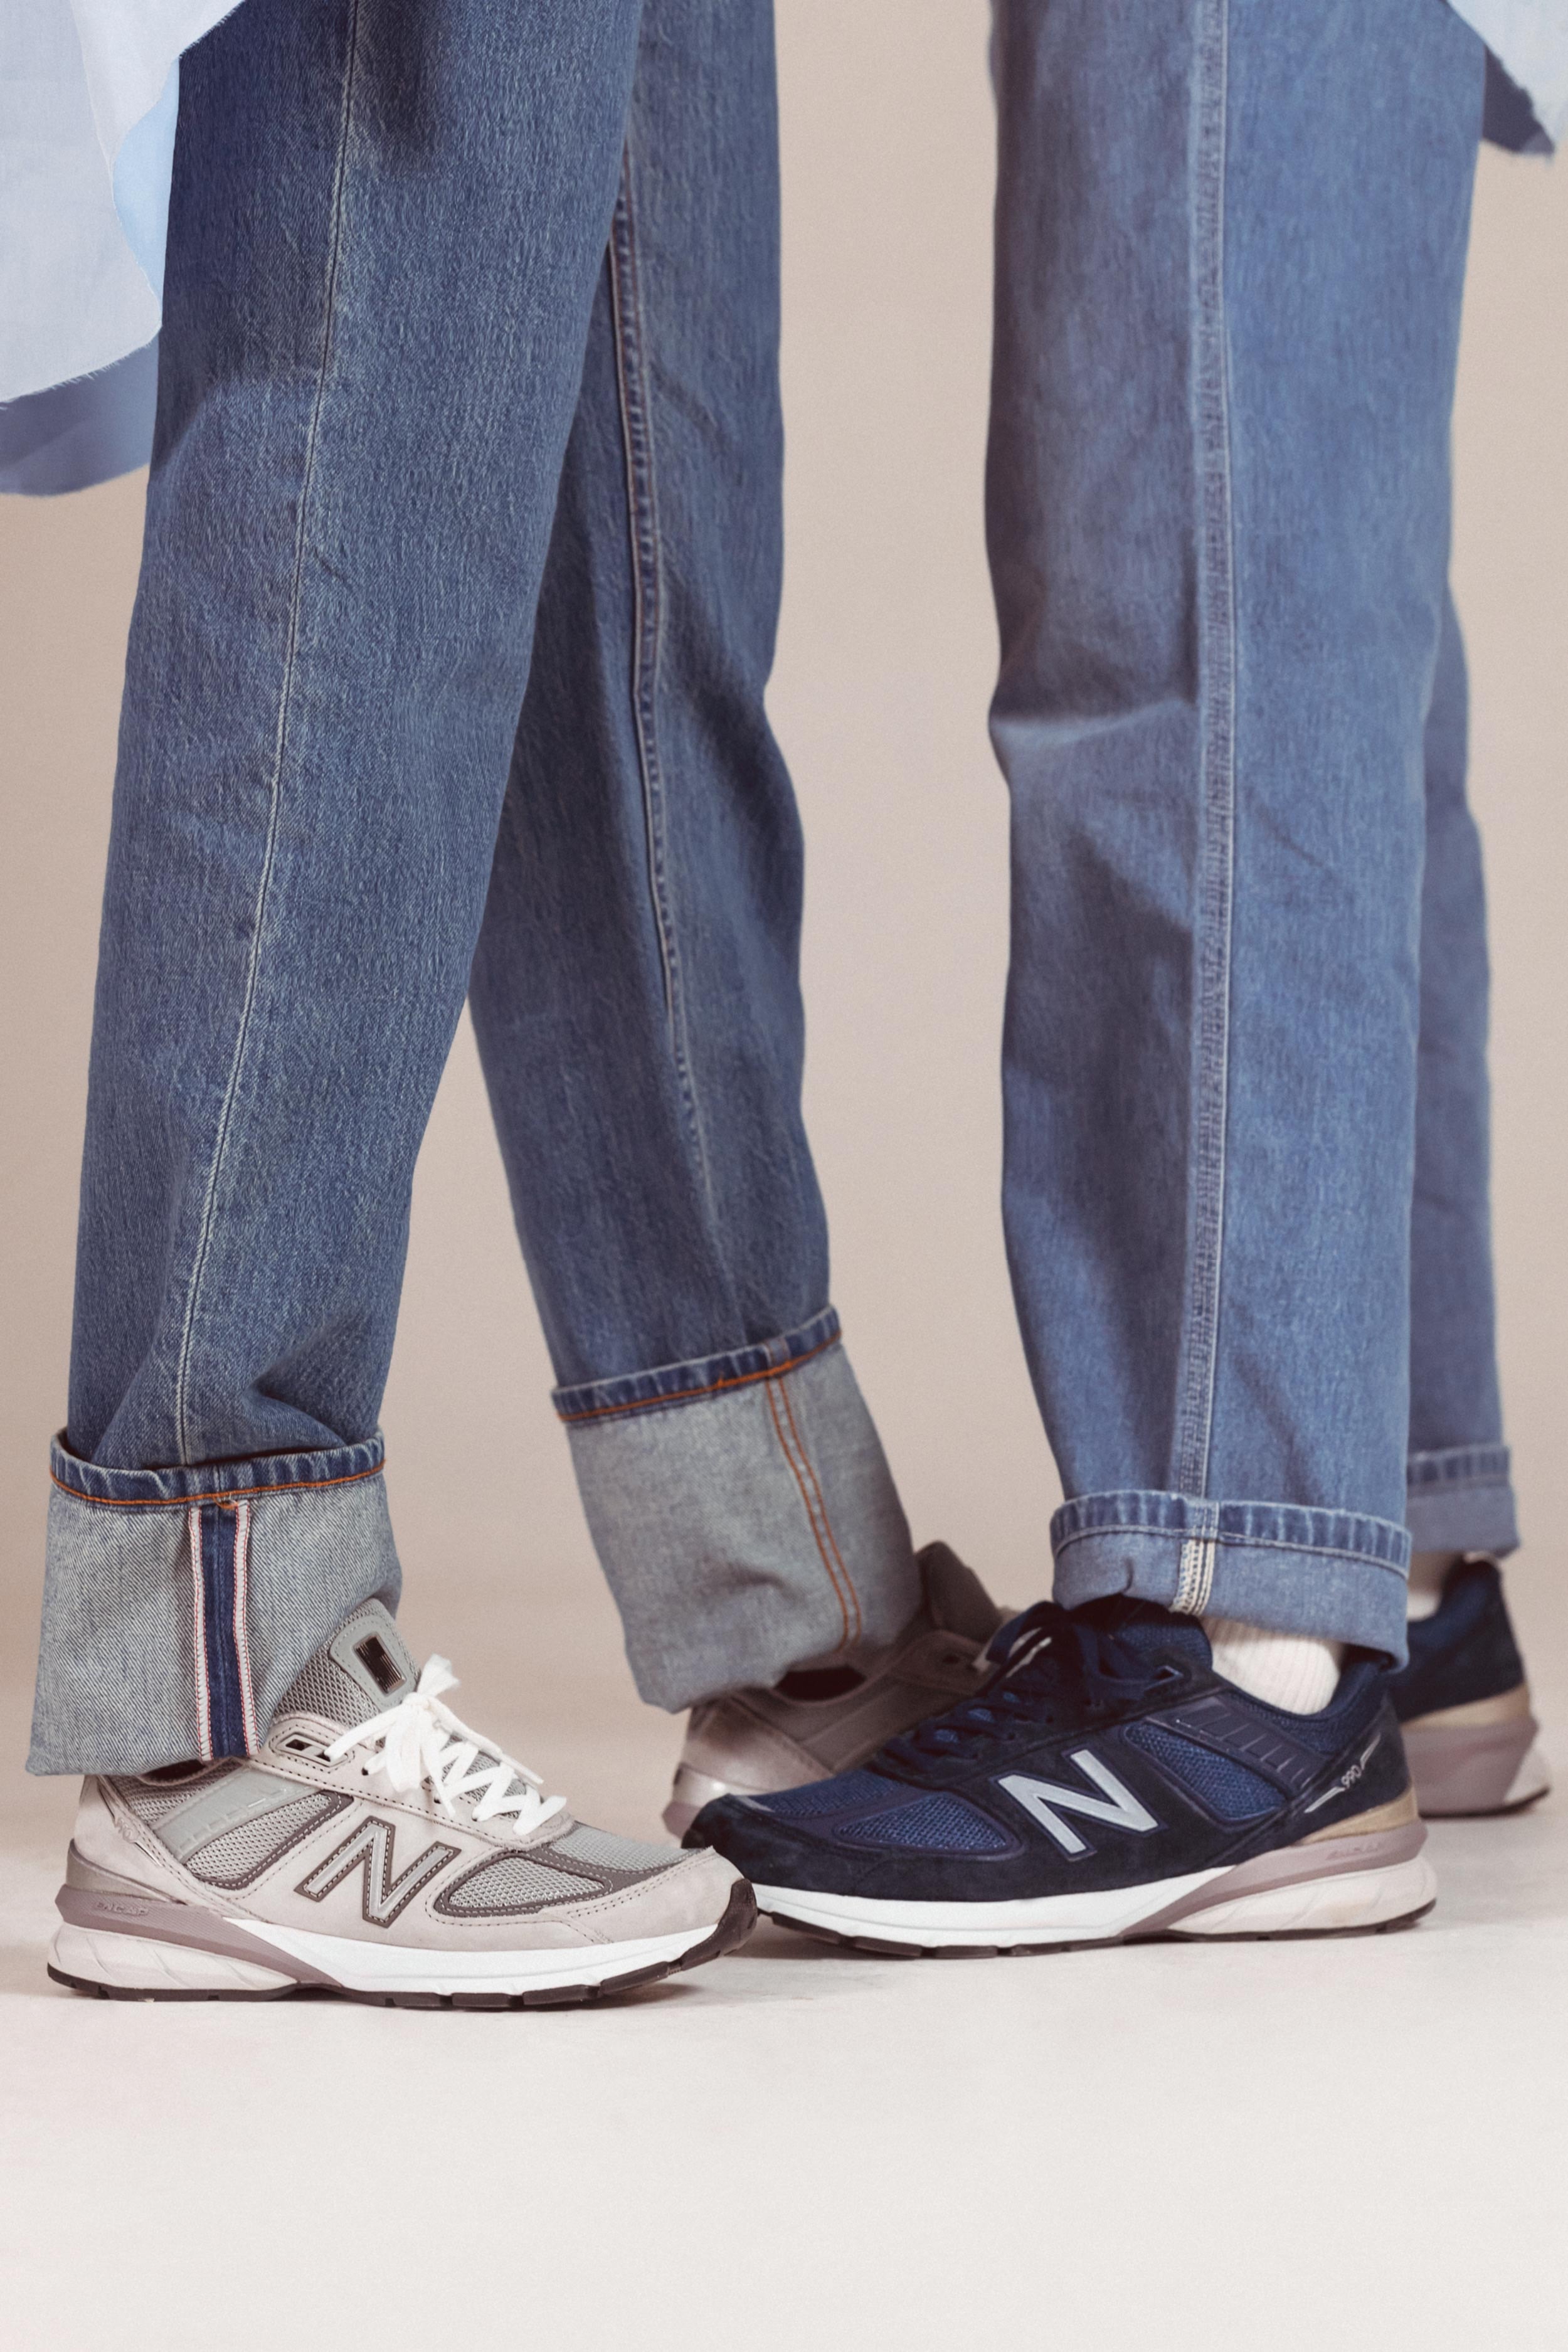 new balance 990v5 dad sneaker styling editorial jeans